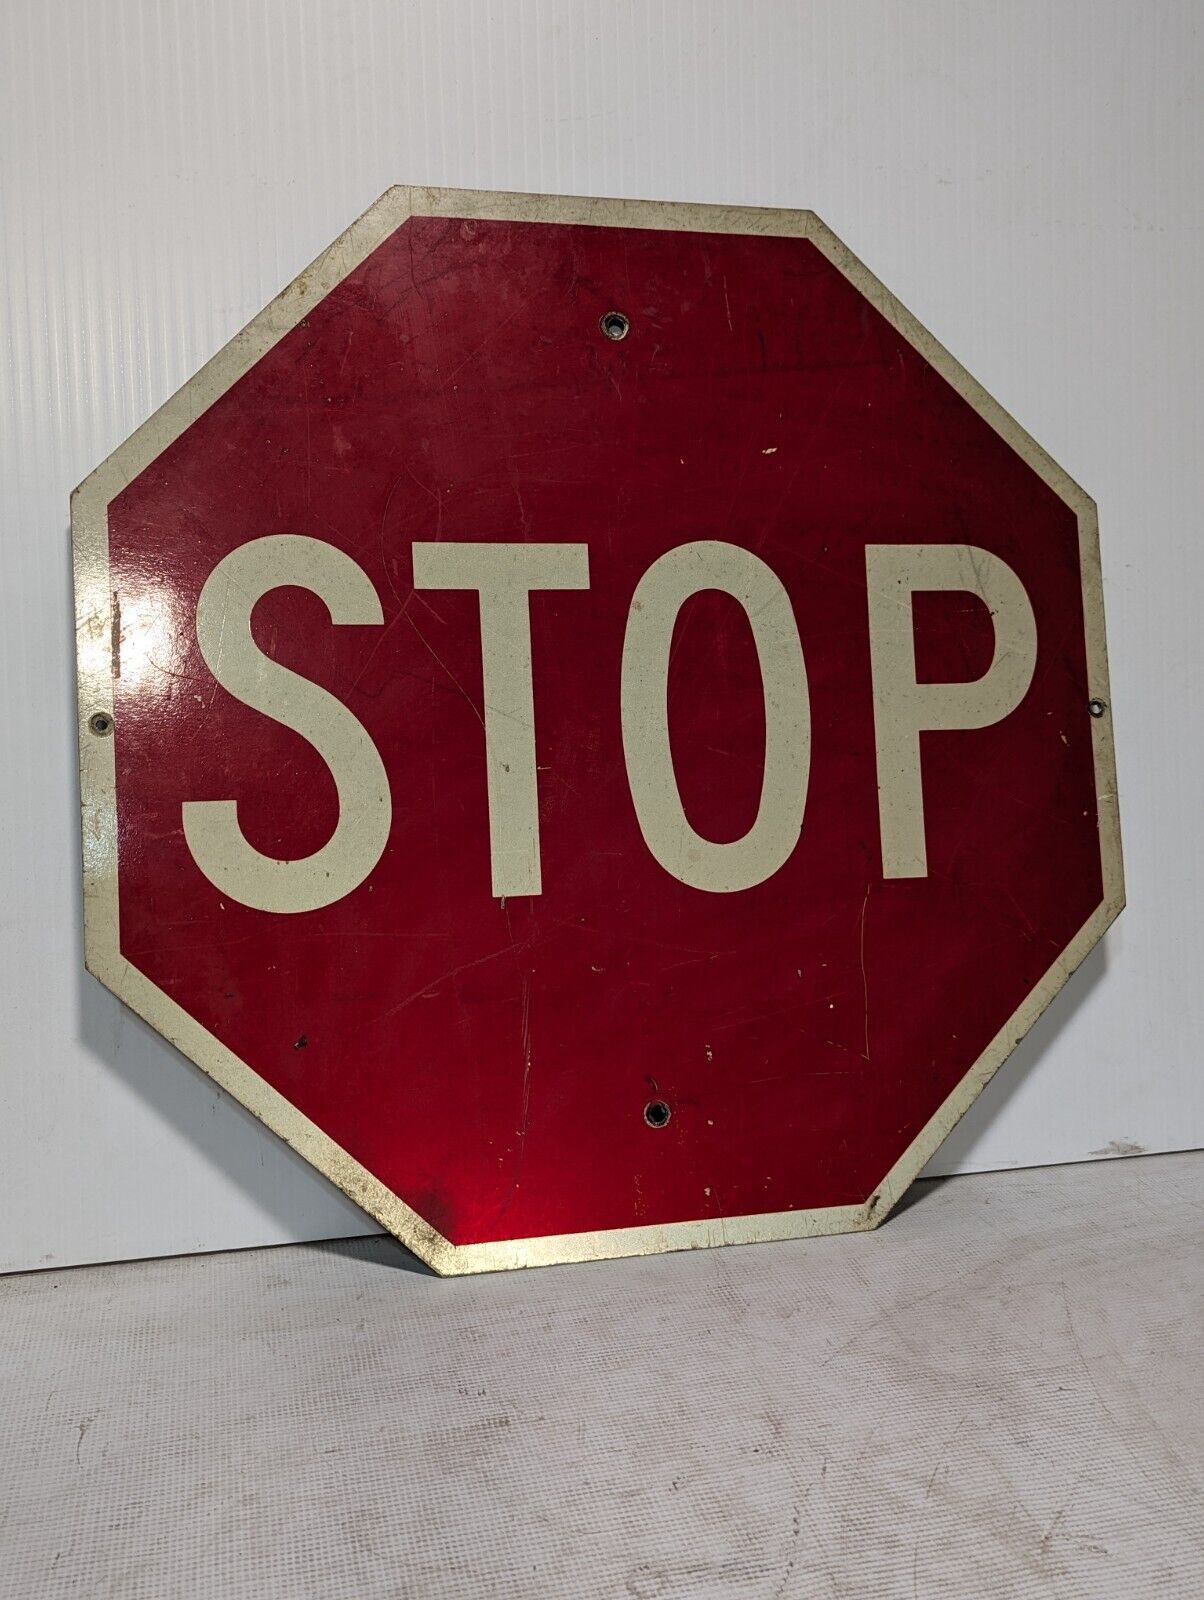 Decommissioned metal stop sign, red, white, sepia, vintage, 24in x 24in